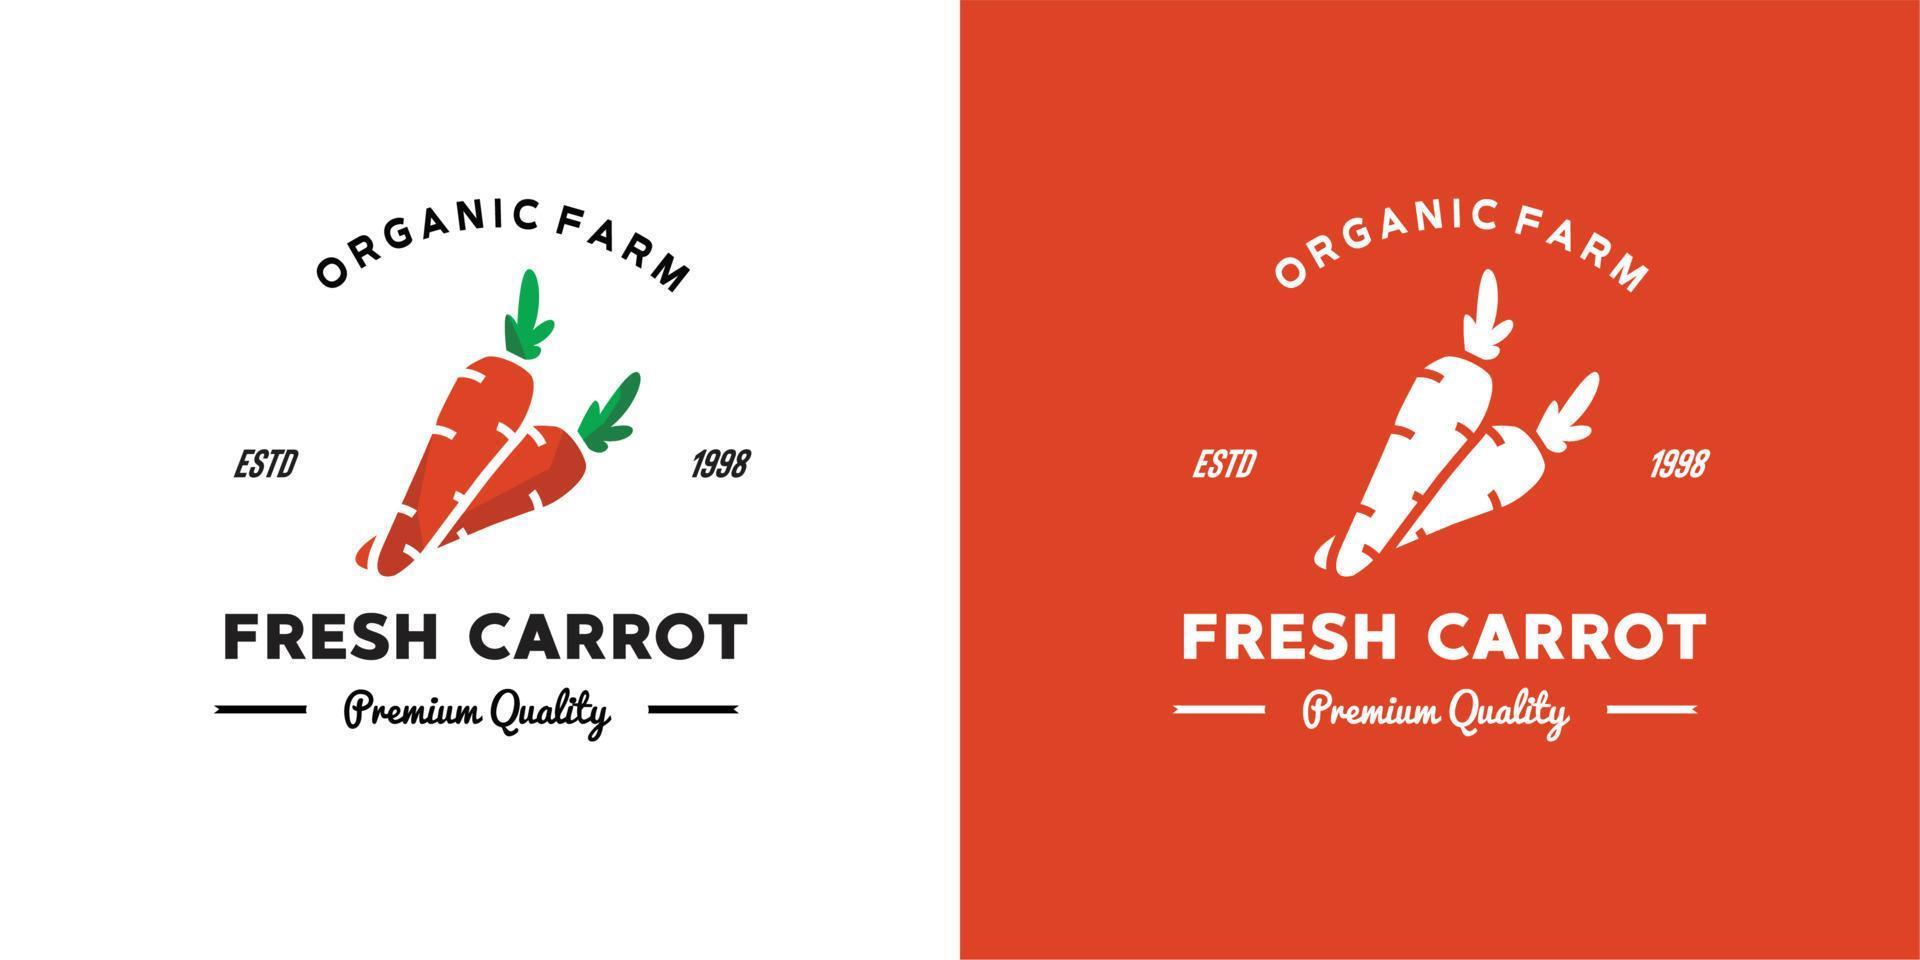 ILLUSTRATION VECTOR GRAPHIC OF orange fresh carrot from organic farm GOOD FOR carrot vintage logo best quality vegetable at retail shop groceries